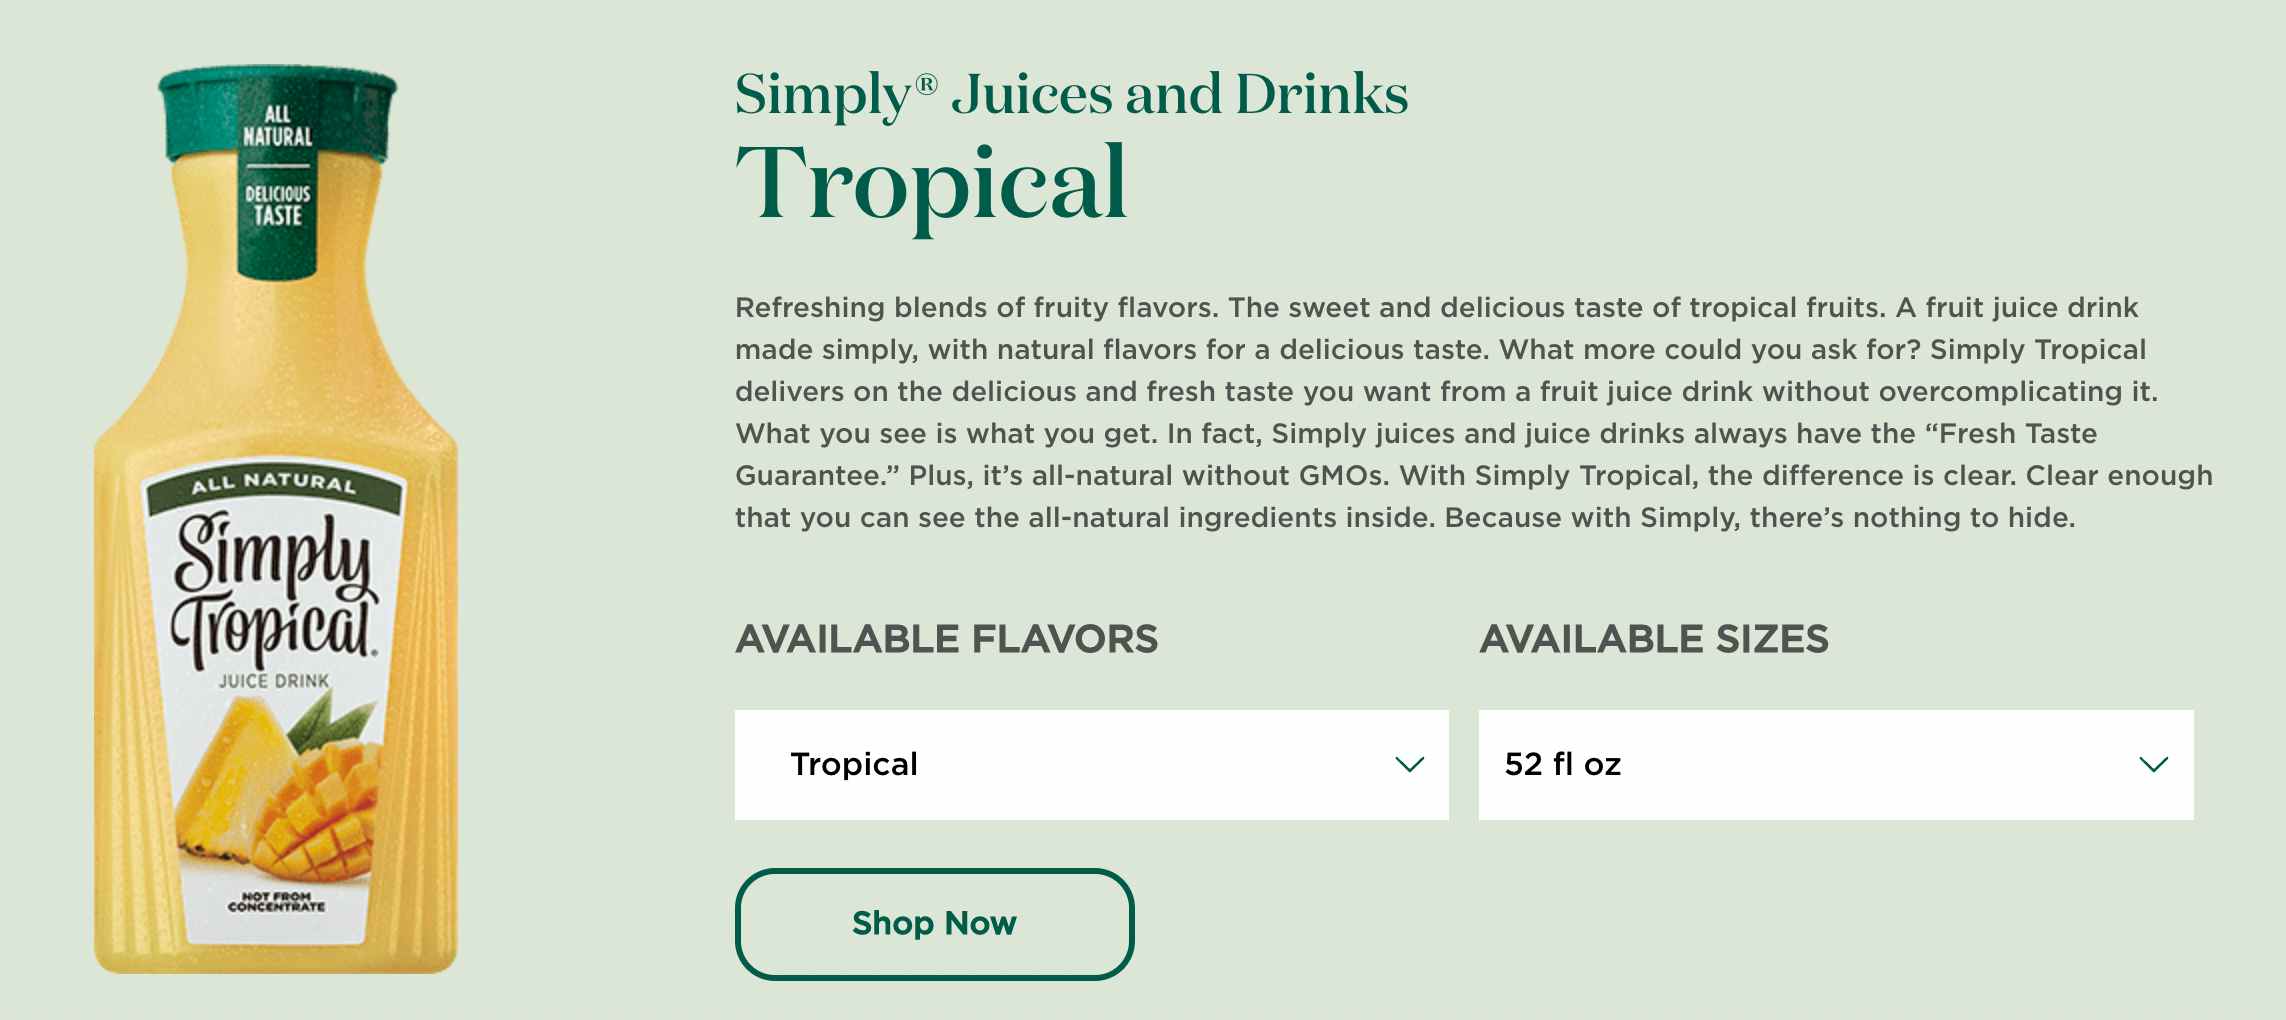 Simply Tropical advertisement that is at issue with the class action lawsuit